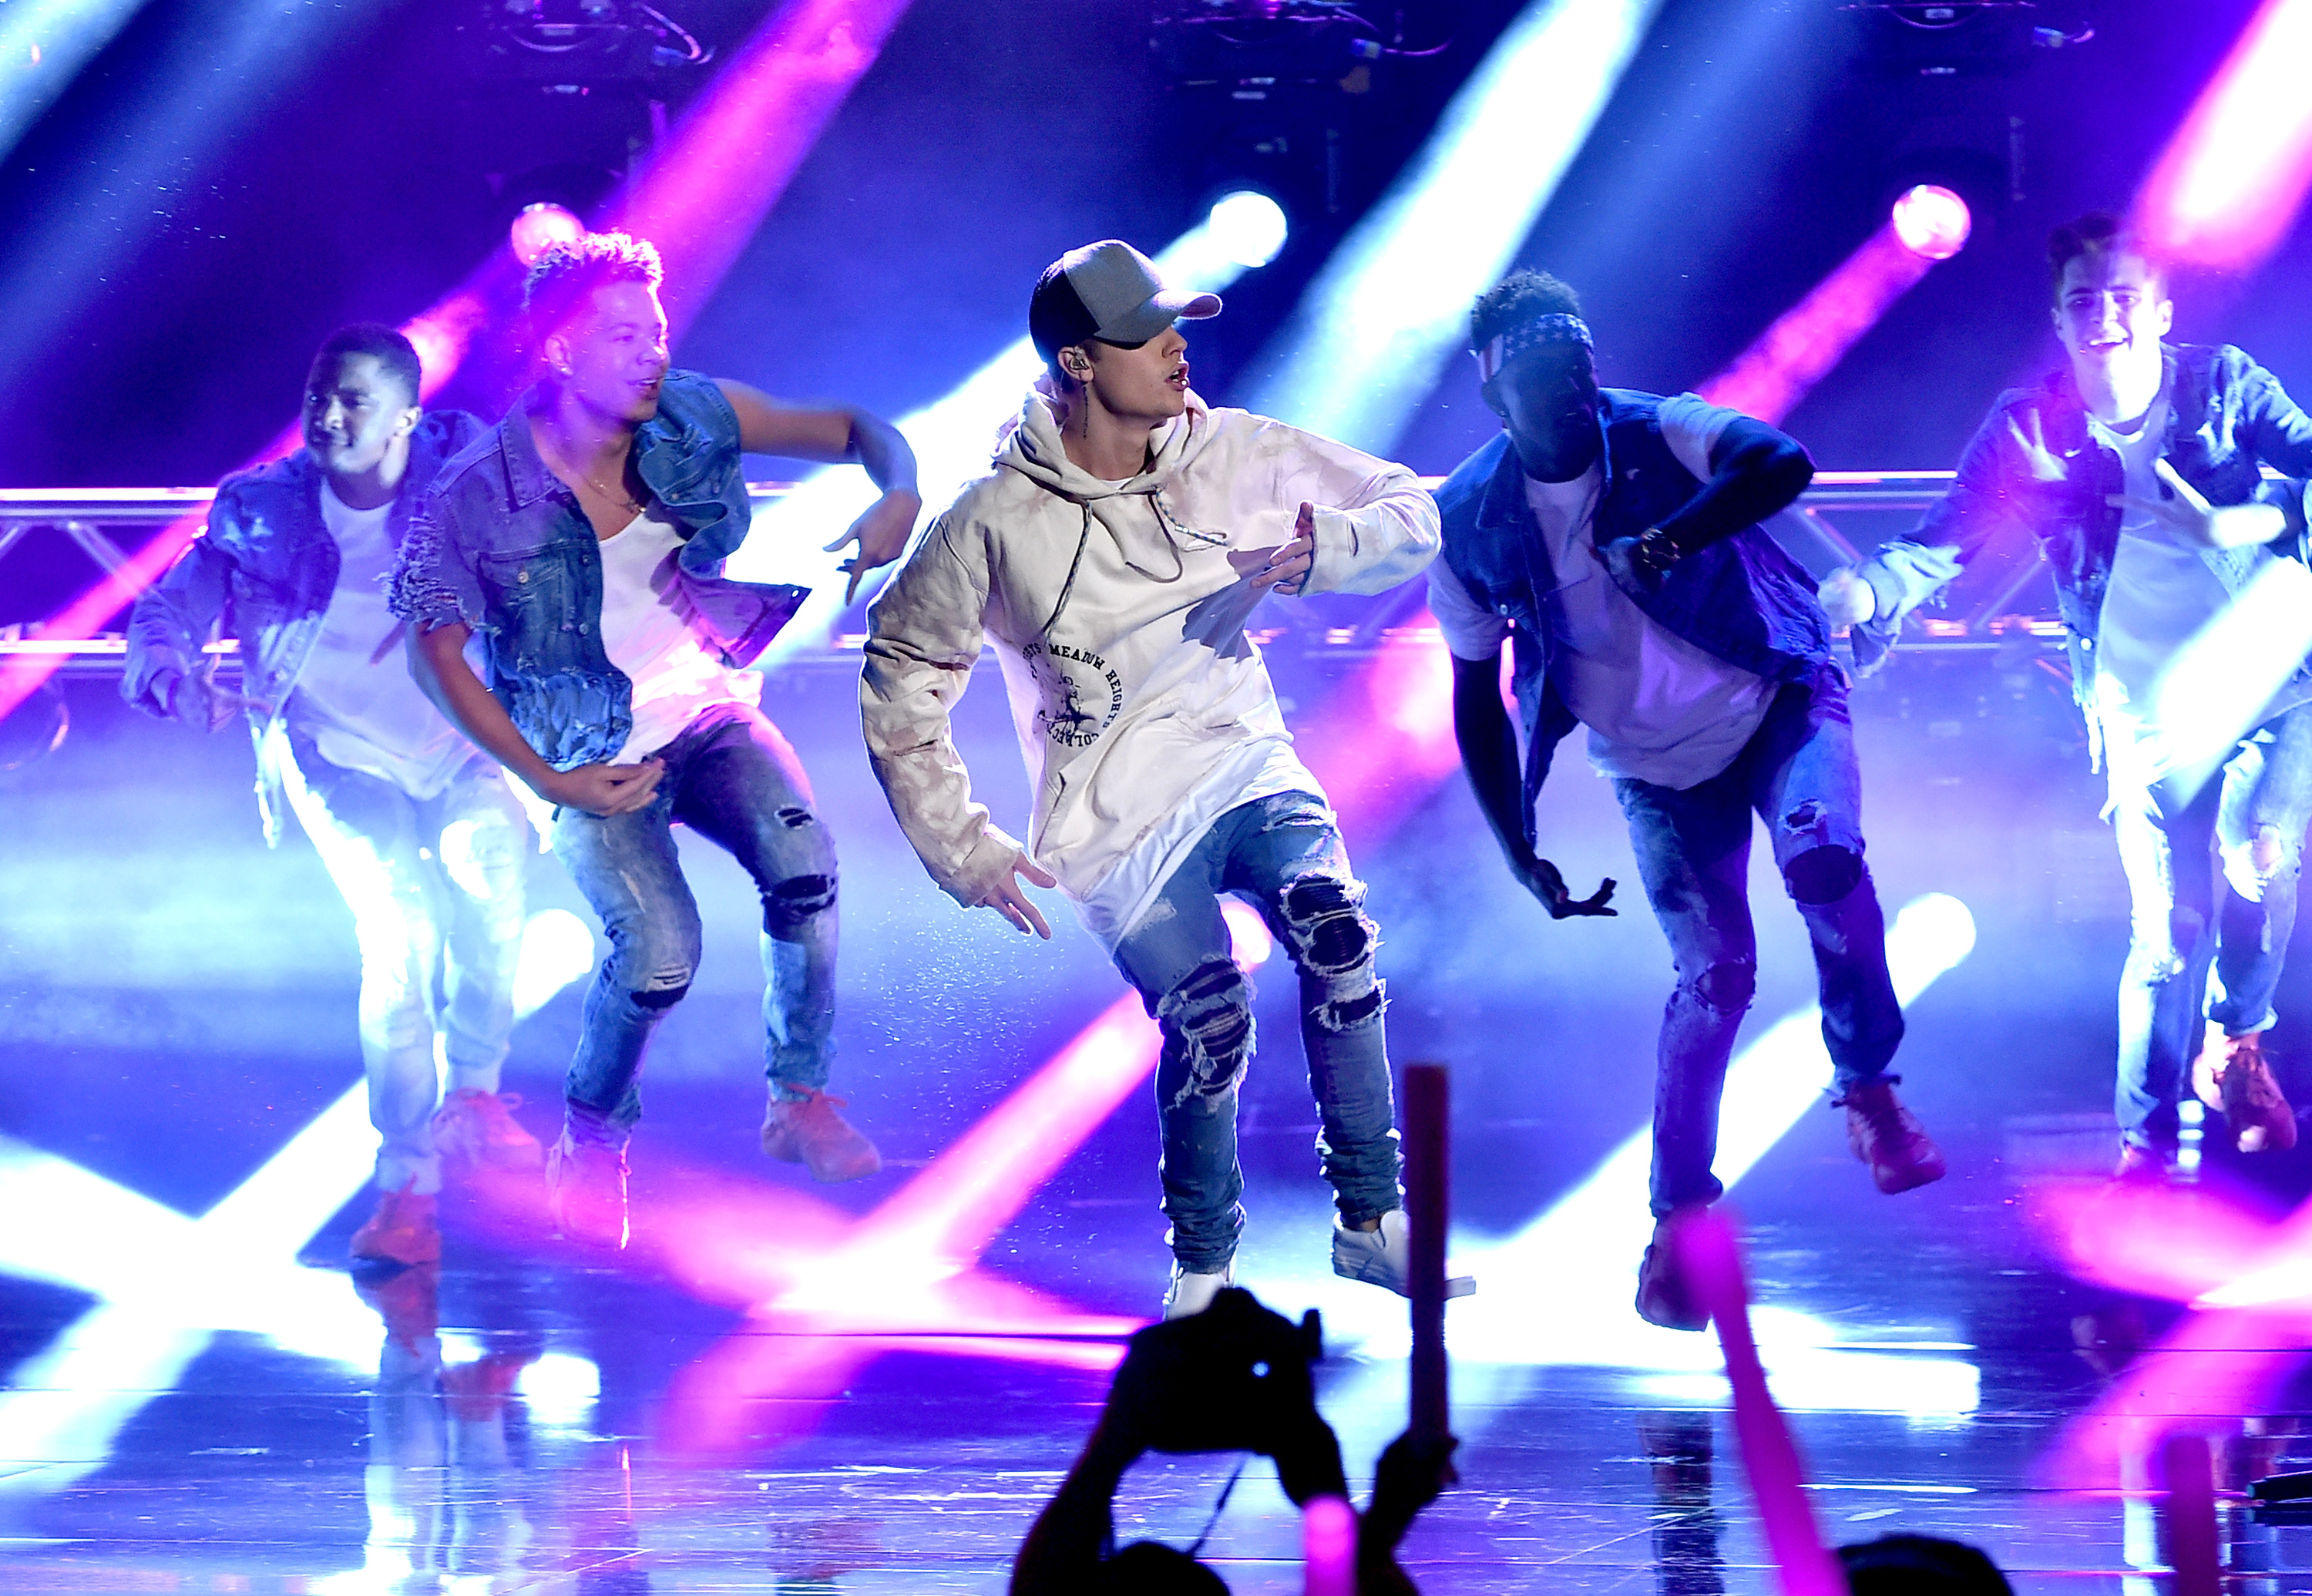 LOS ANGELES, CA - NOVEMBER 22: Singer Justin Bieber performs onstage during the 2015 American Music Awards at Microsoft Theater on November 22, 2015 in Los Angeles, California. (Photo by Kevin Winter/Getty Images)